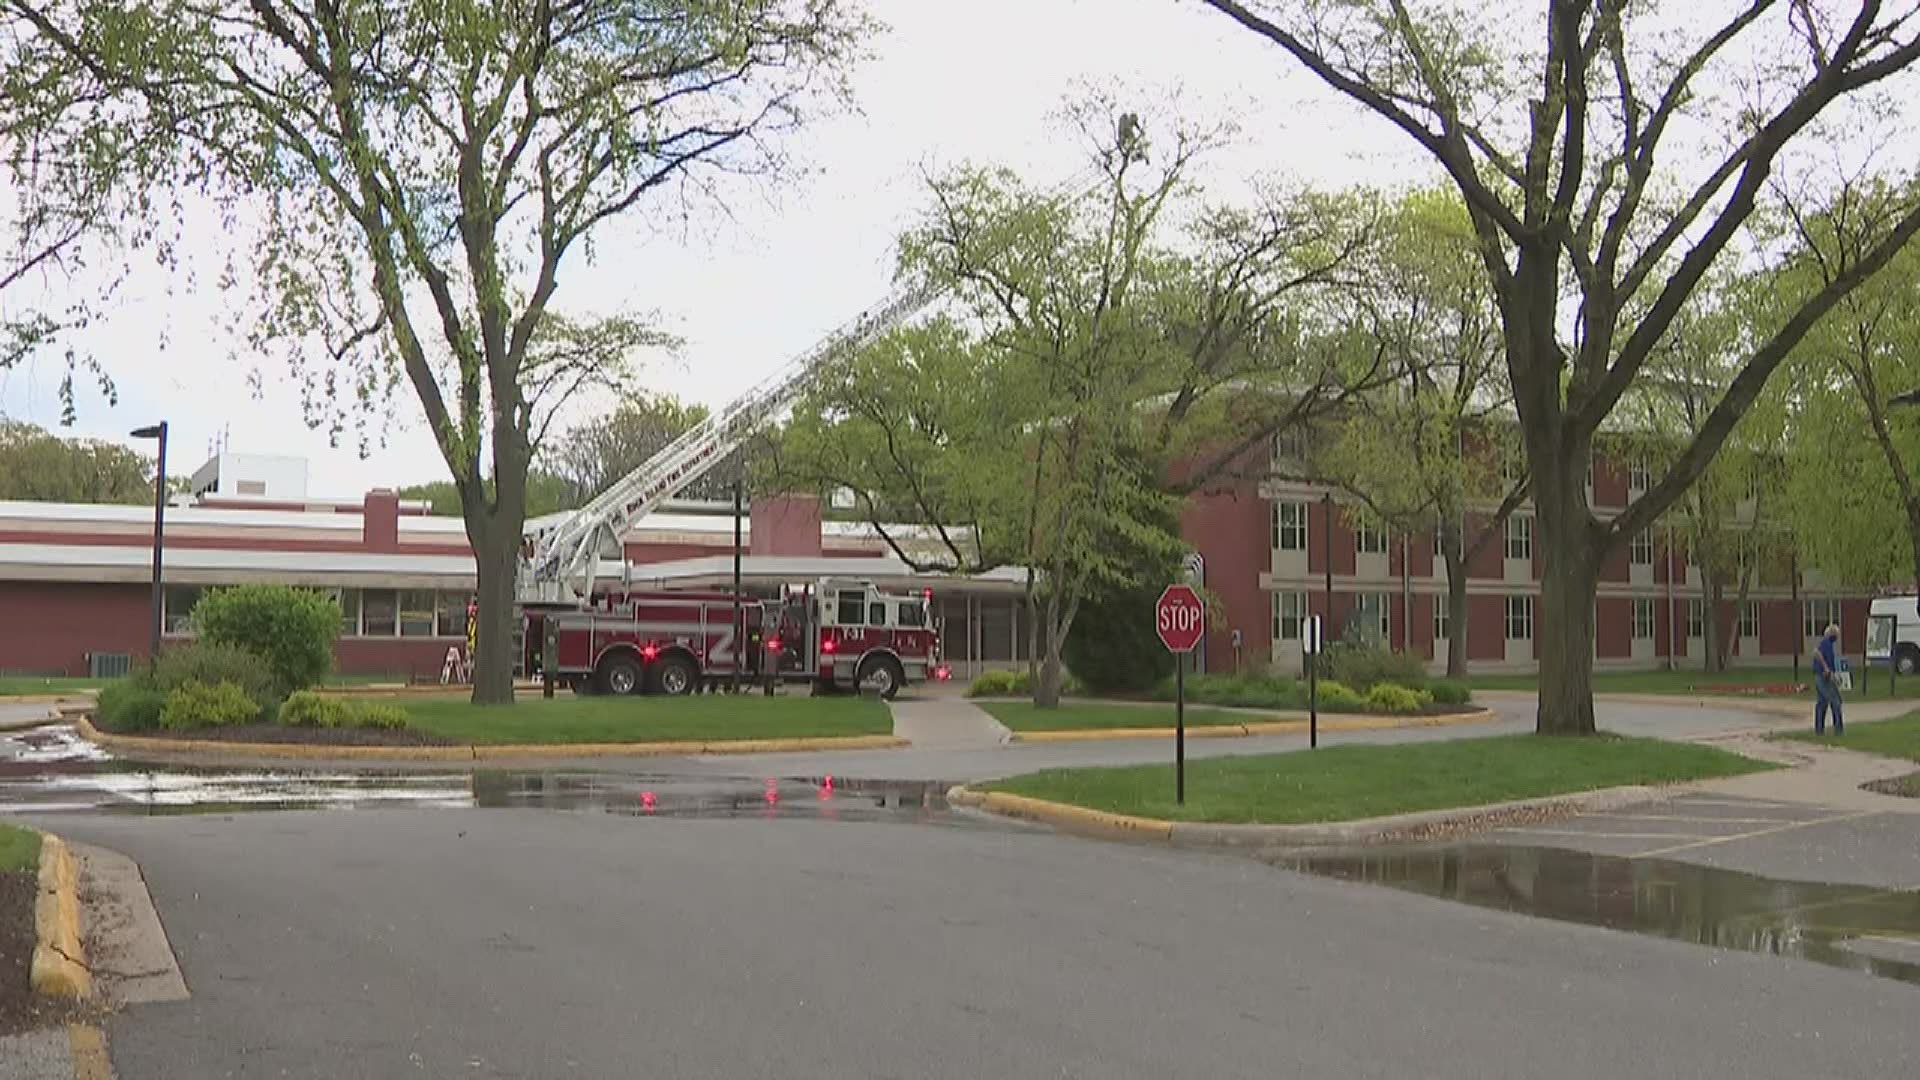 Students were evacuated after a fire broke out at a residence hall, but luckily, it was controlled quickly and didn't cause serious structural damage.